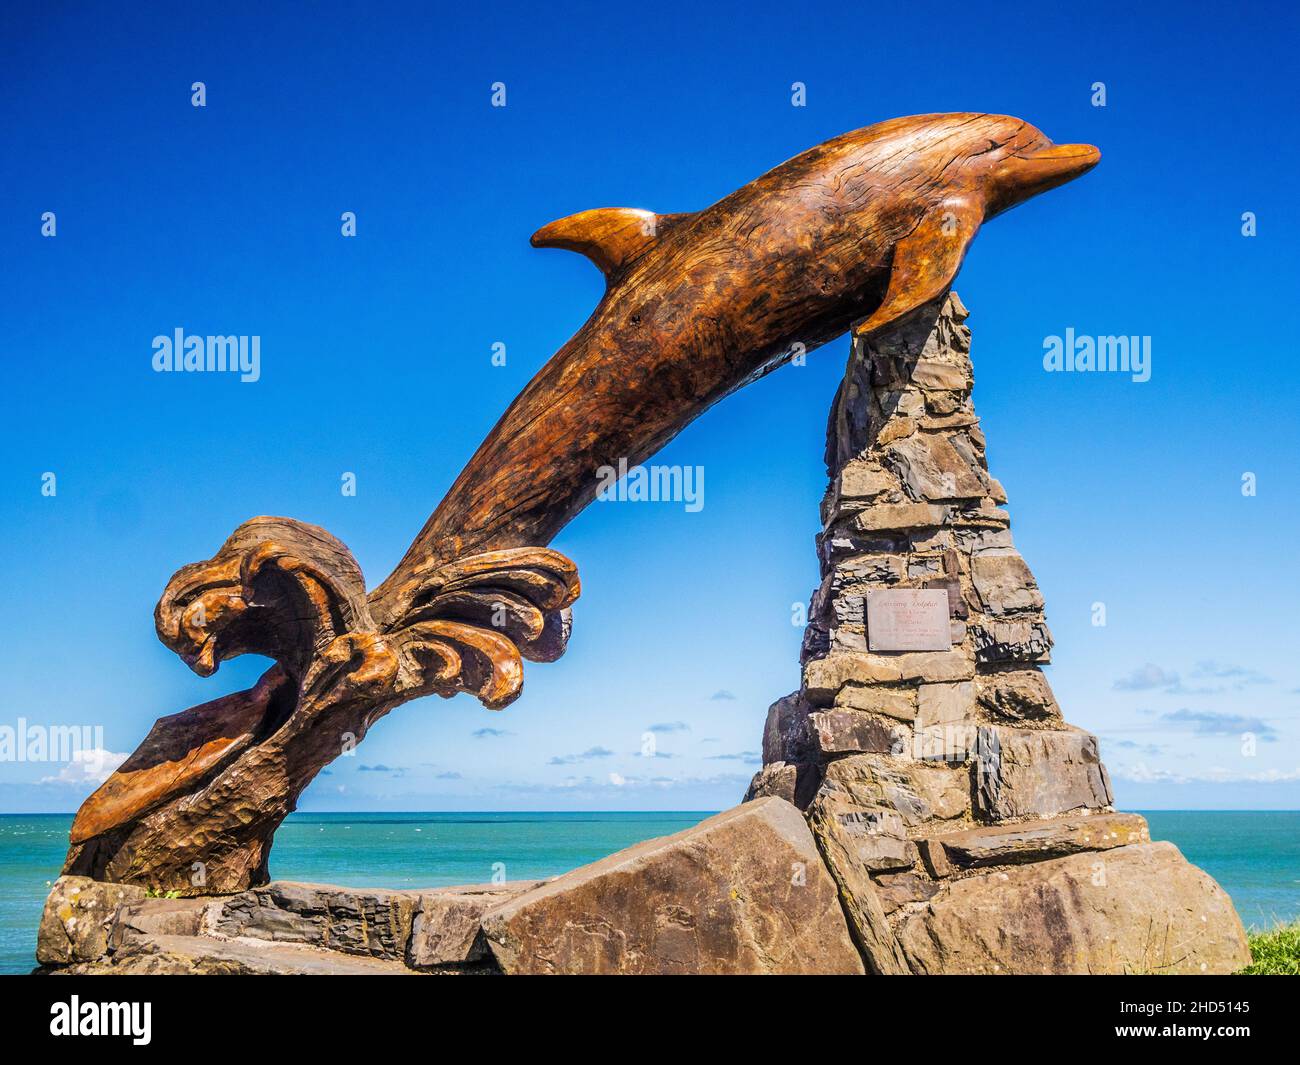 The Leaping Dolphin at Aberporth on the Welsh coast in Ceredigion. Stock Photo